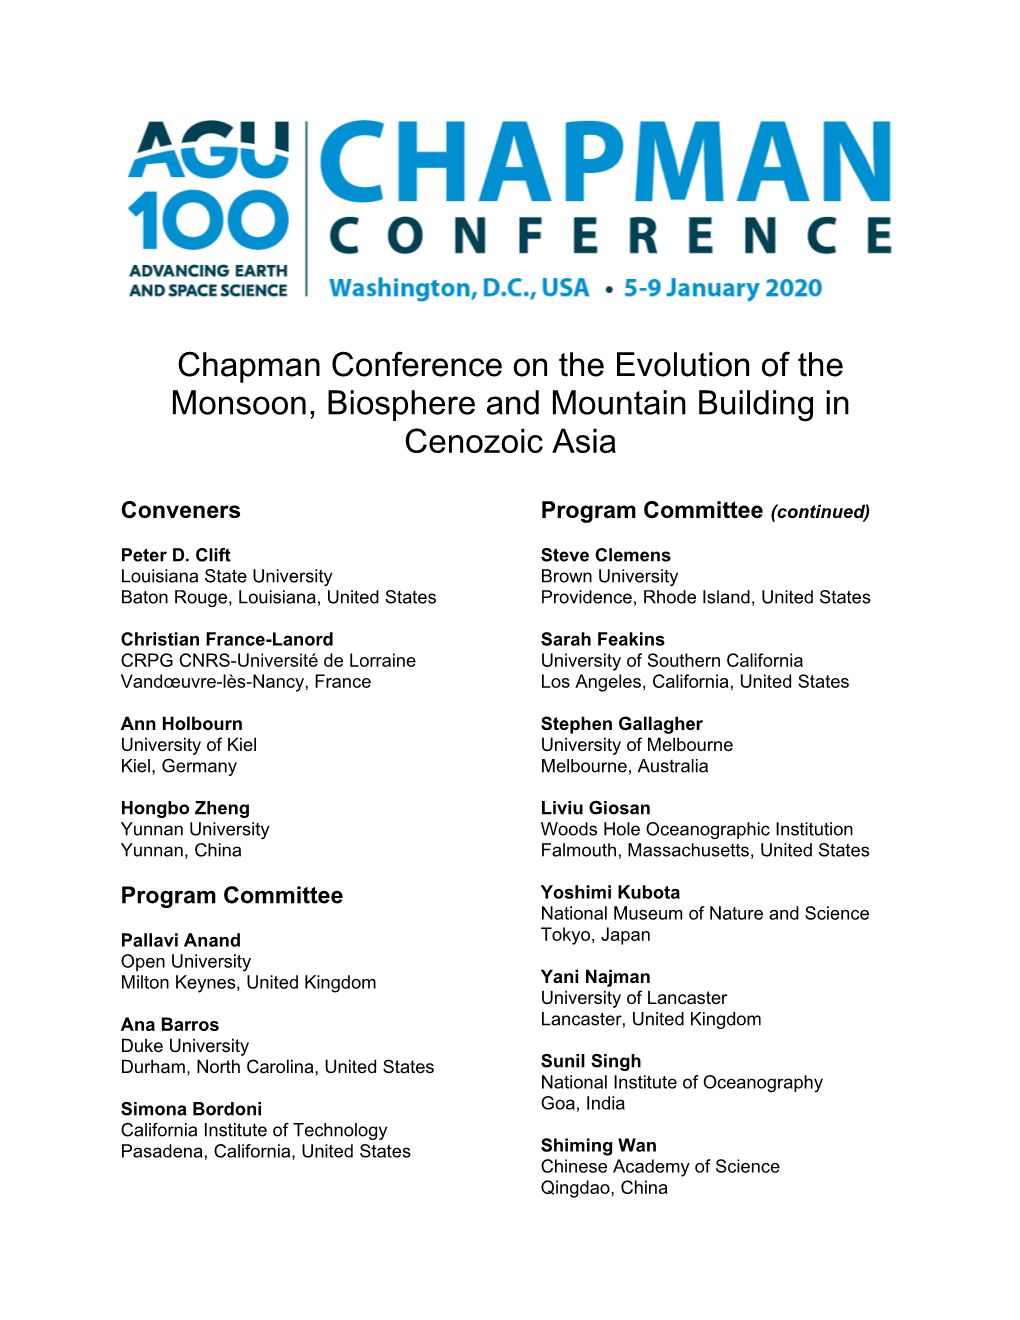 Chapman Conference on the Evolution of the Monsoon, Biosphere and Mountain Building in Cenozoic Asia